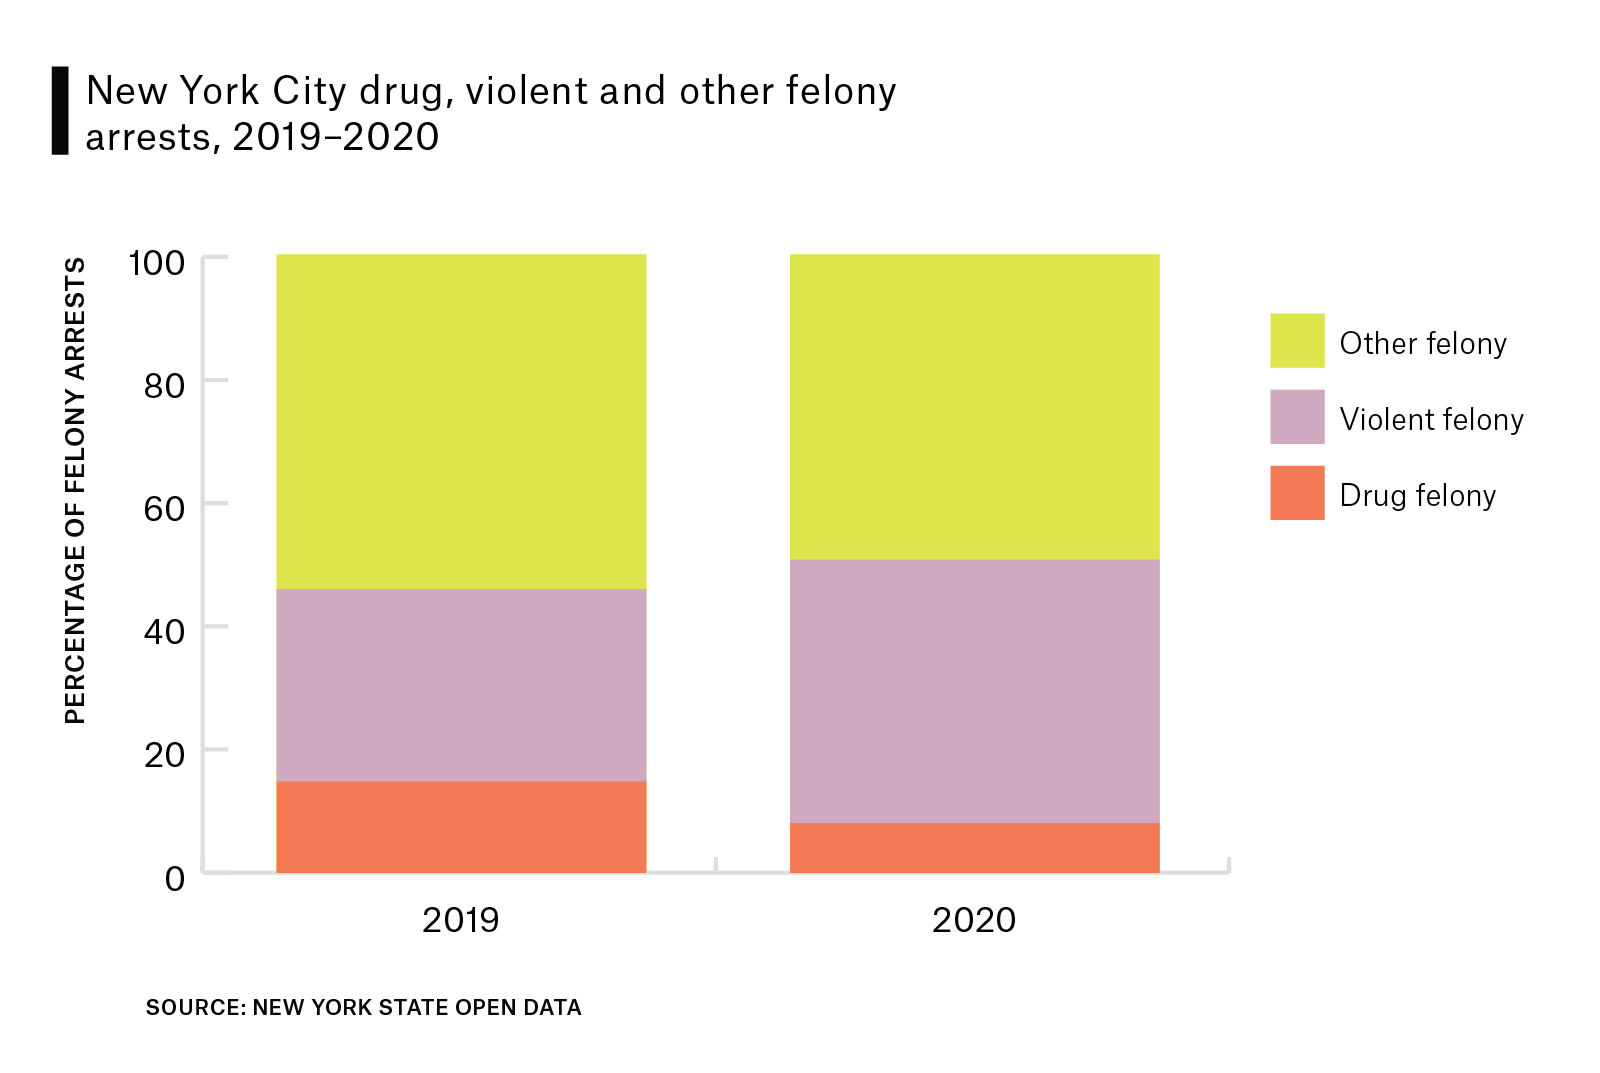 Stacked bar chart illustrates N, Y, C drug, violent and other felony arrests in 2019 and 2020. Drug felony arrests have the lowest percentage, followed by violent and other felonies. In 2020, drug and other felonies are lower, violent felonies are higher.